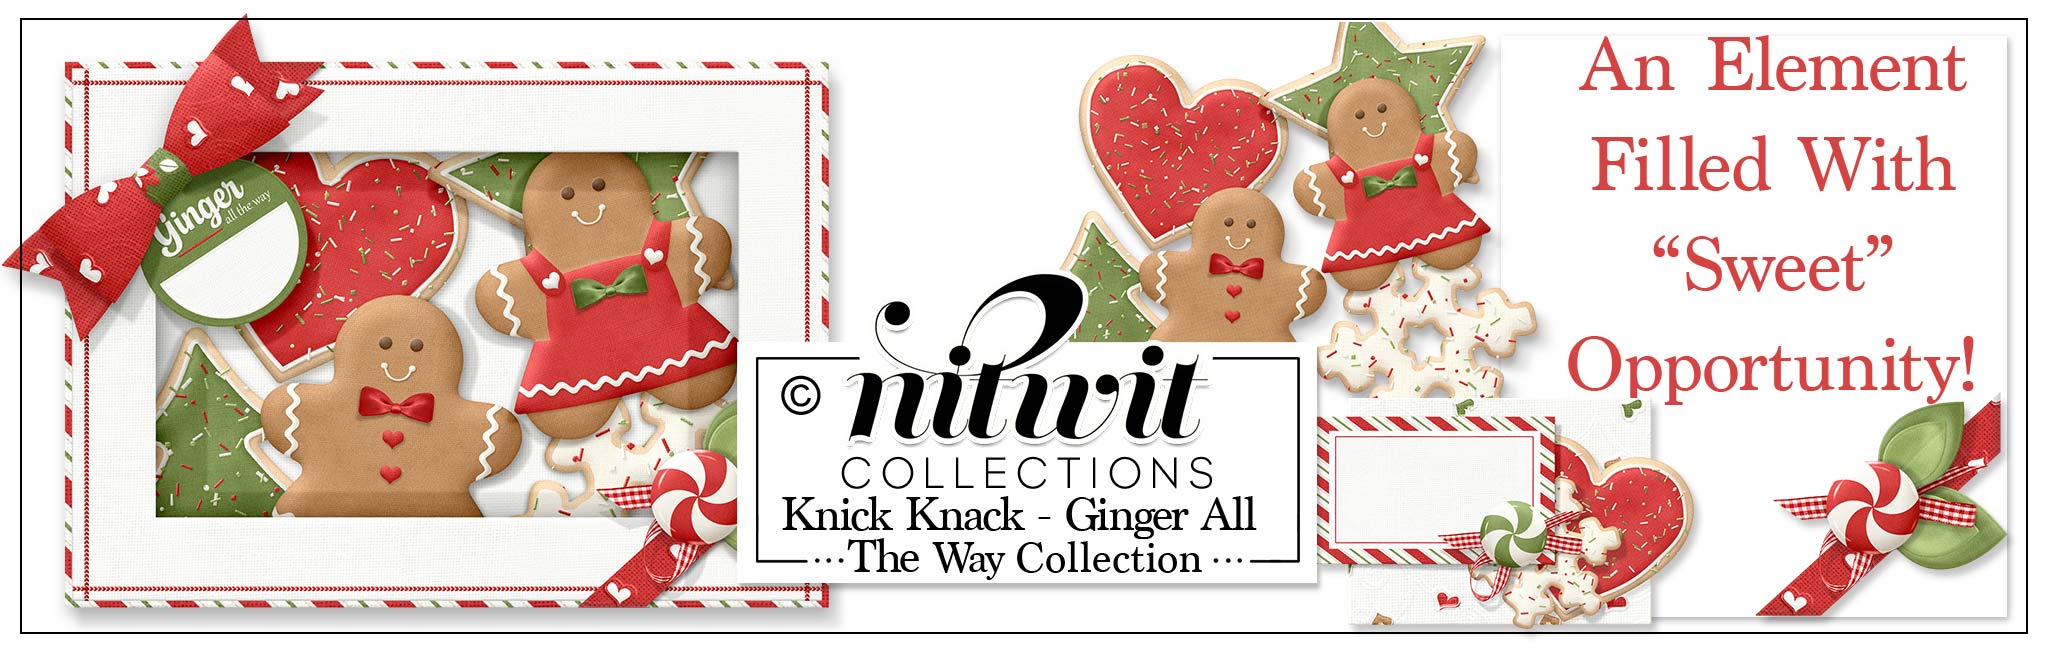 Knick Knack - Ginger All The Way